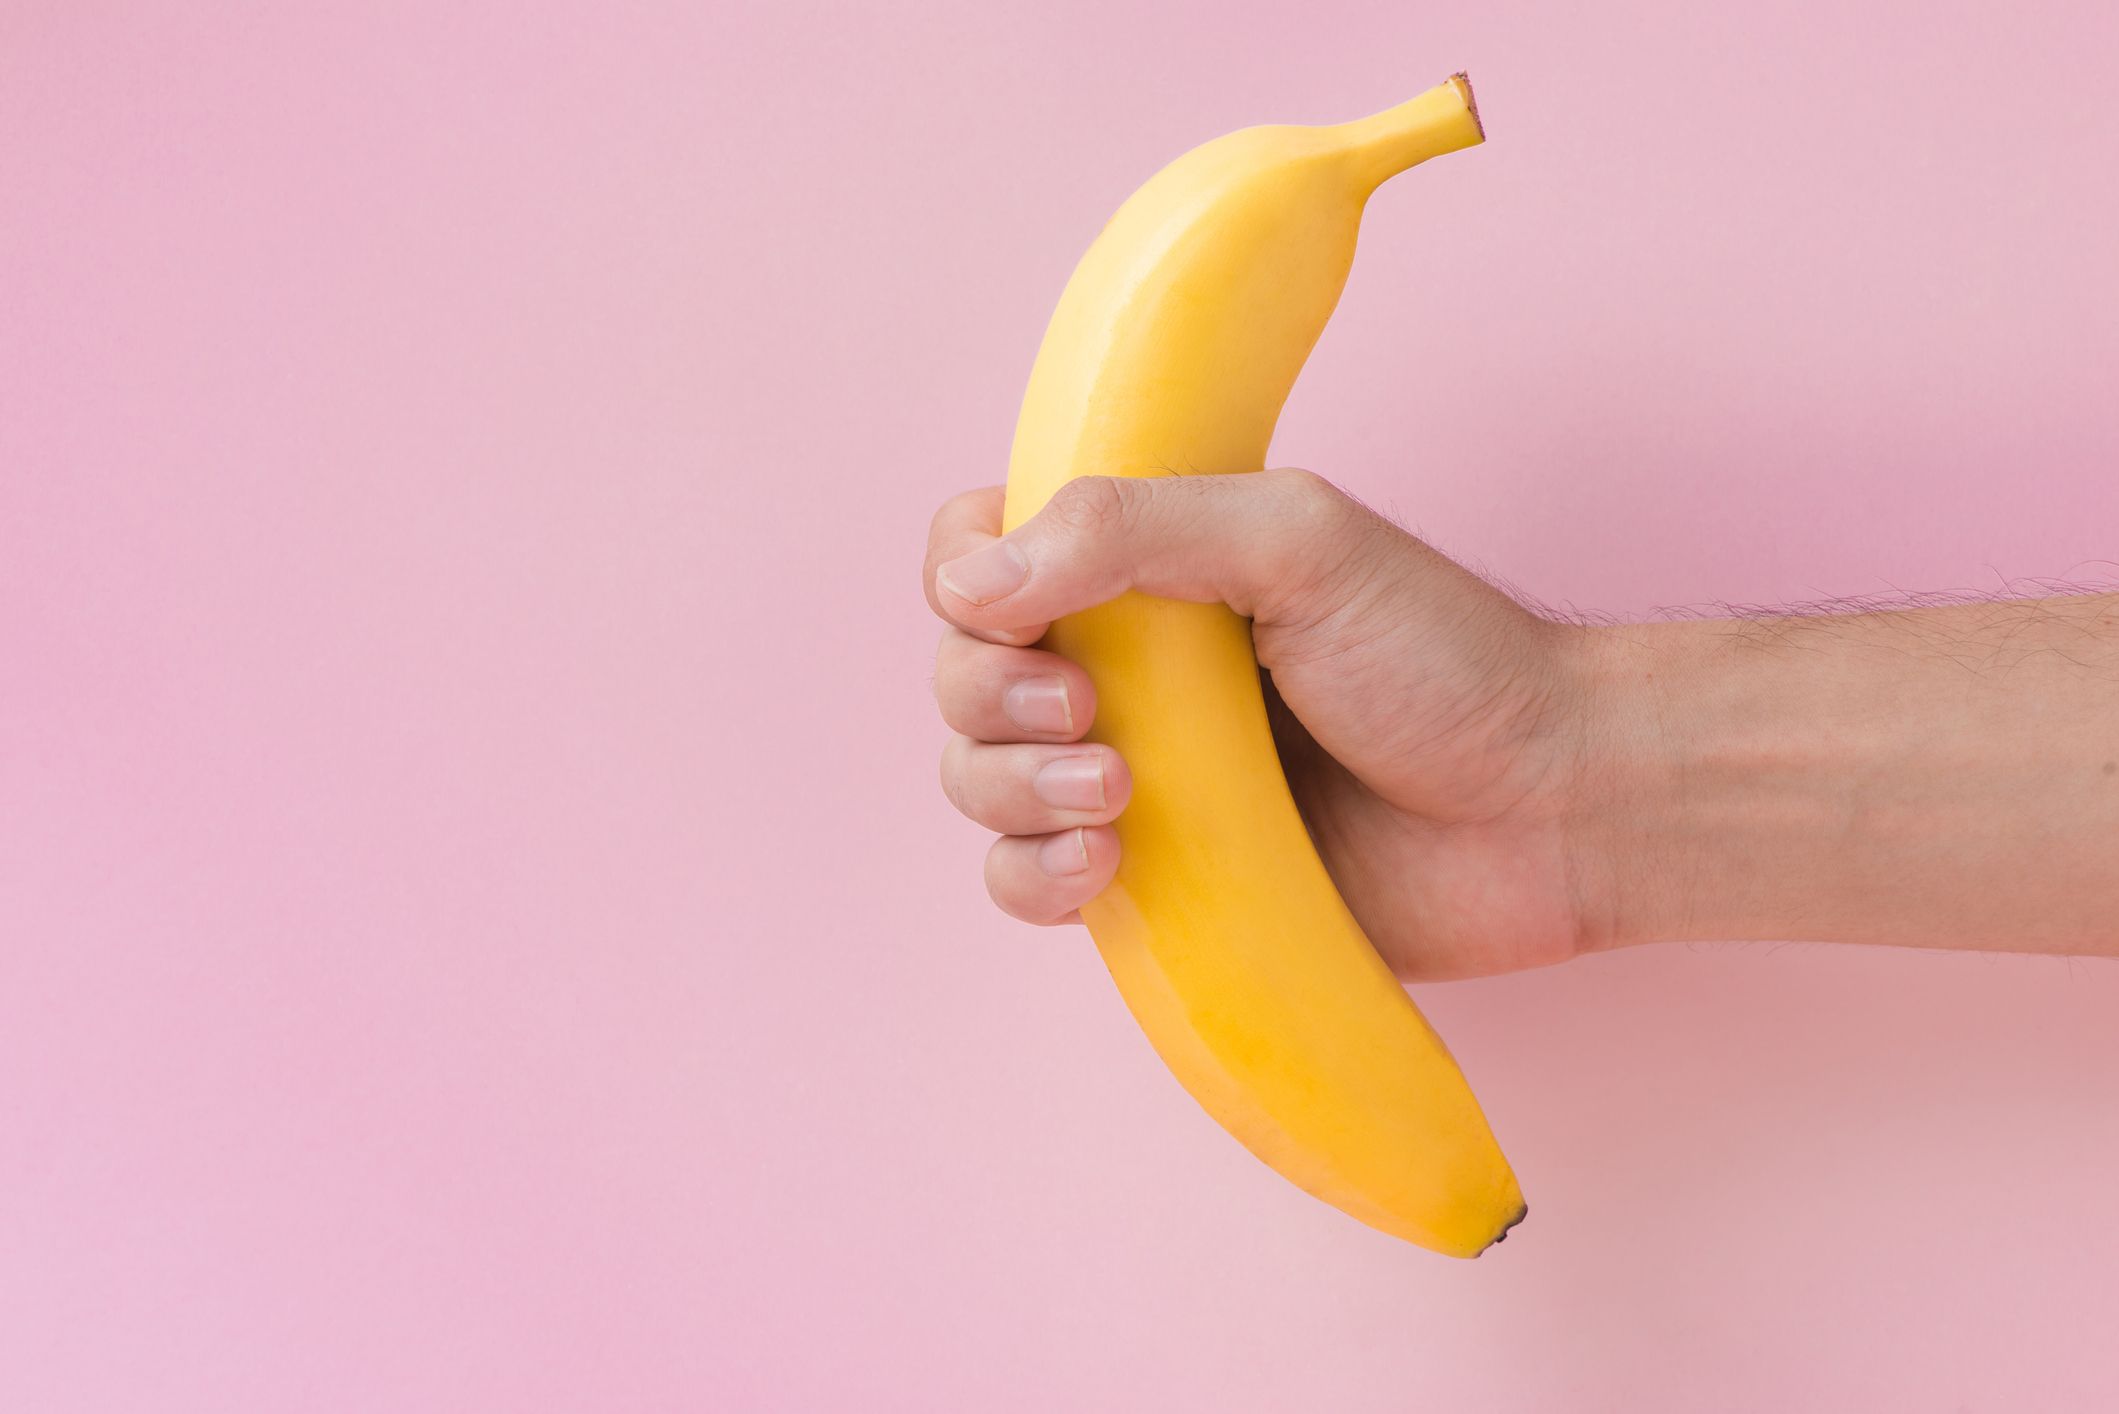 male hand holding a banana isolated on pink background